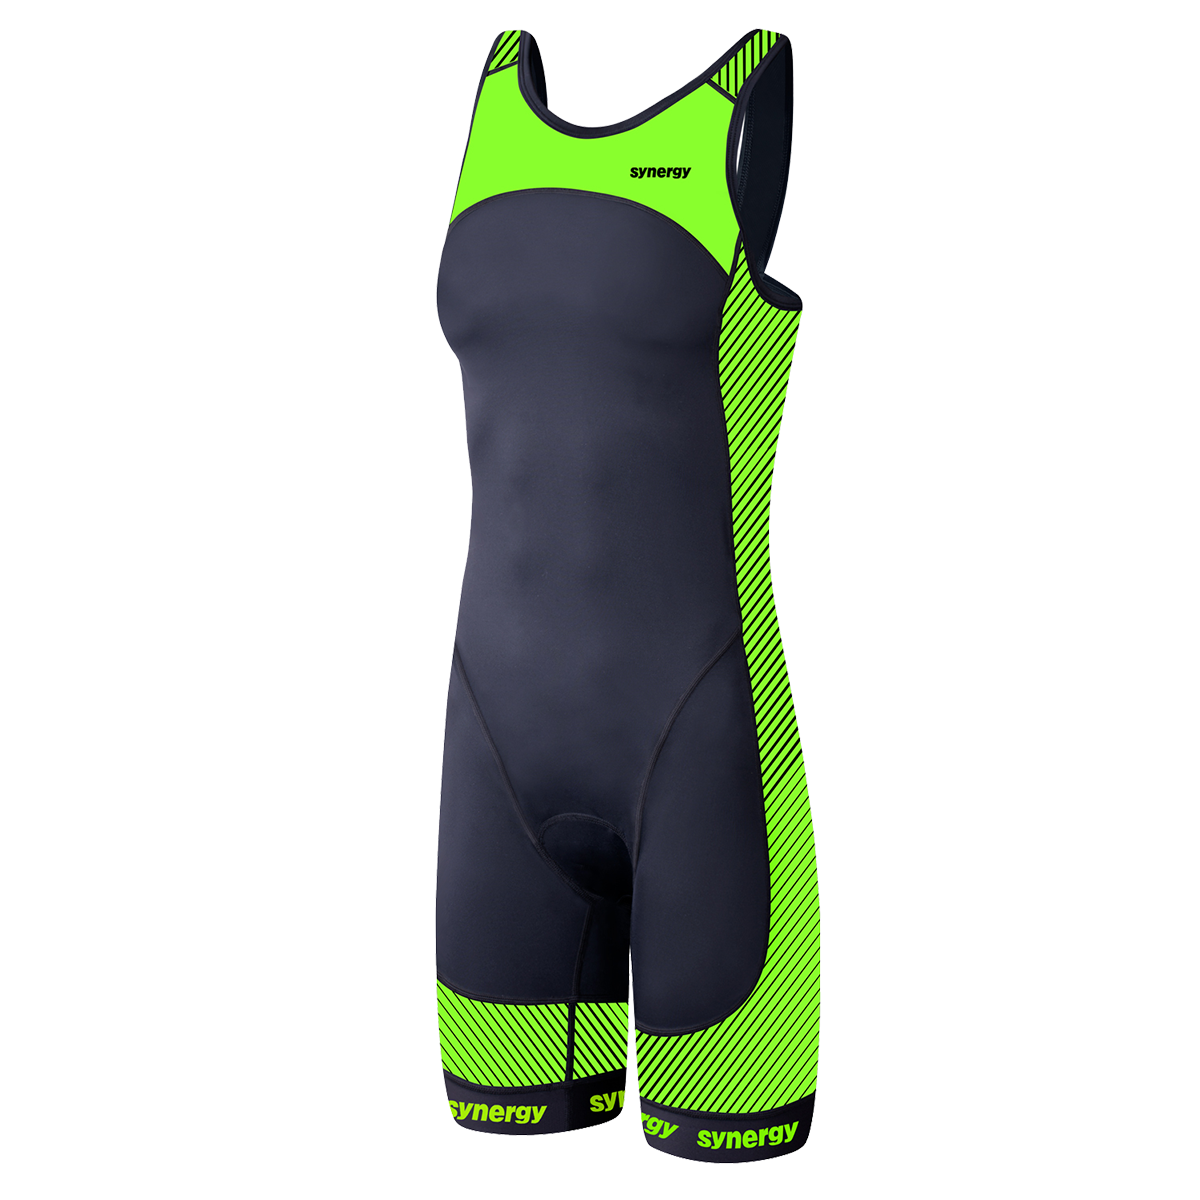 Women's Open Back Tri Suit - Limited Edition USA - Synergy Wetsuits